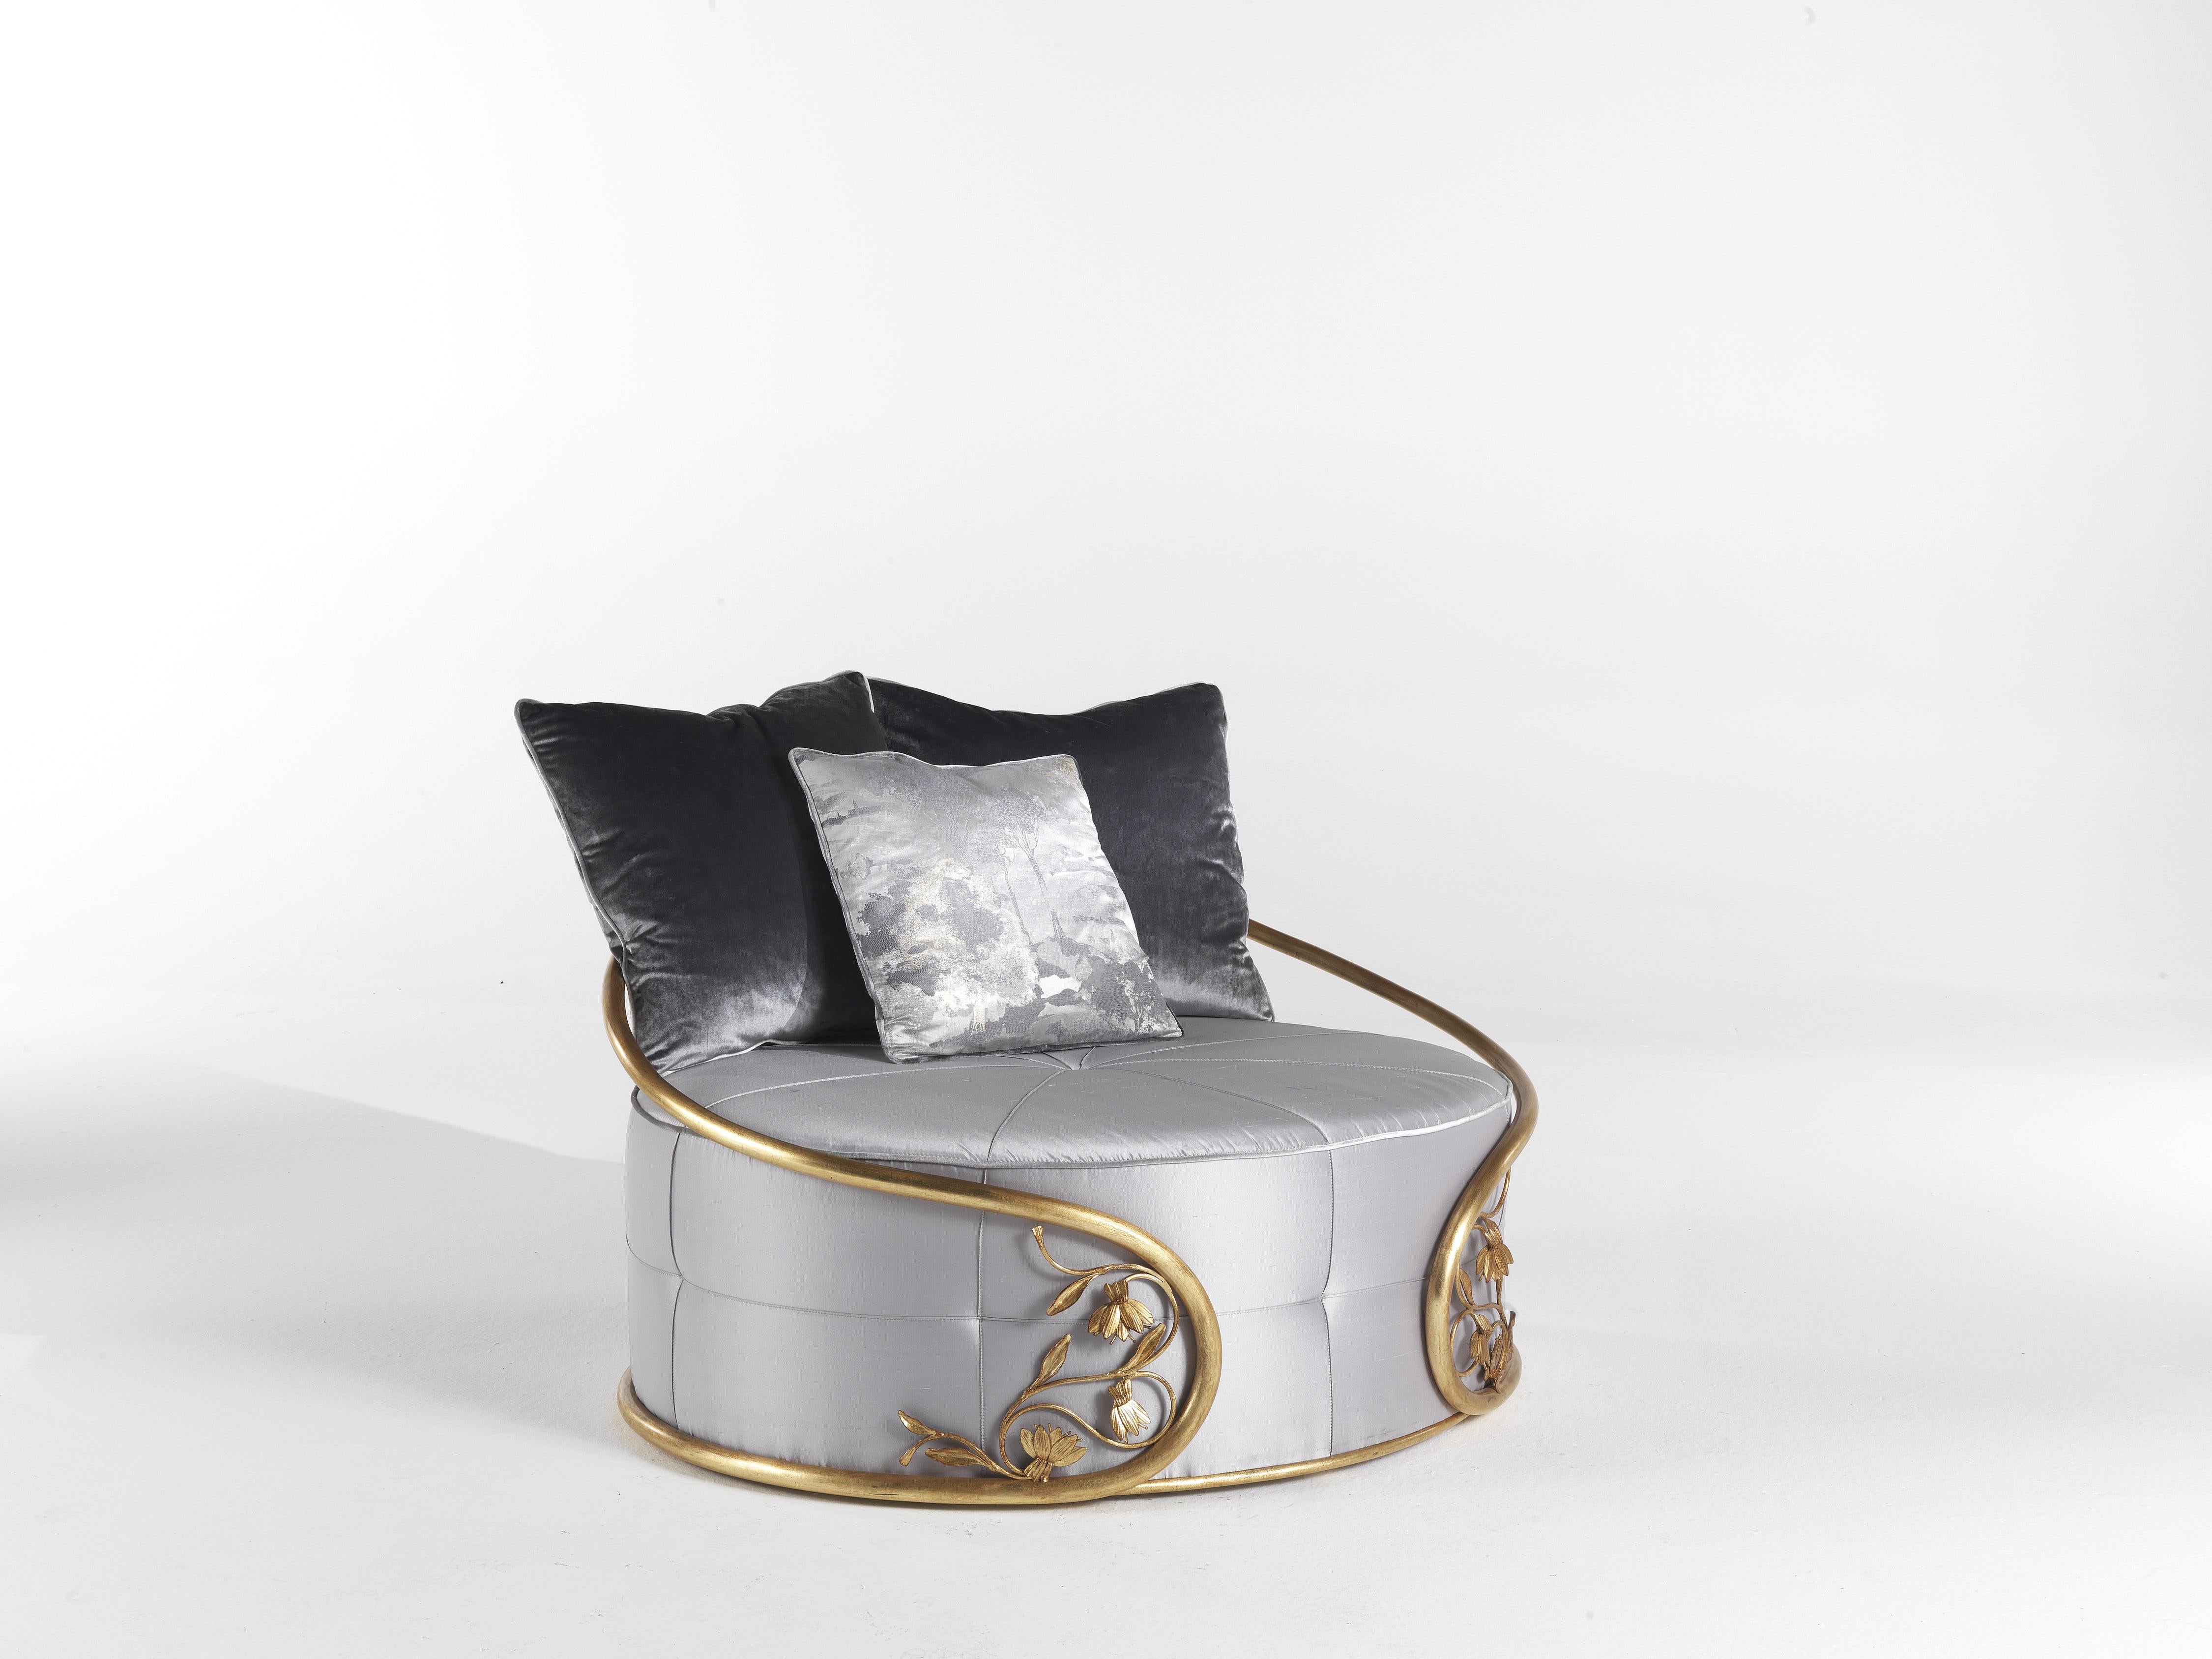 Yoshi is a pouf-shaped armchair with curved lines recalling the shape of the circle, an important symbol of the Zen tradition in which two opposing but complementary forces flow eternally toward each other. The metal structure with a gold leaf